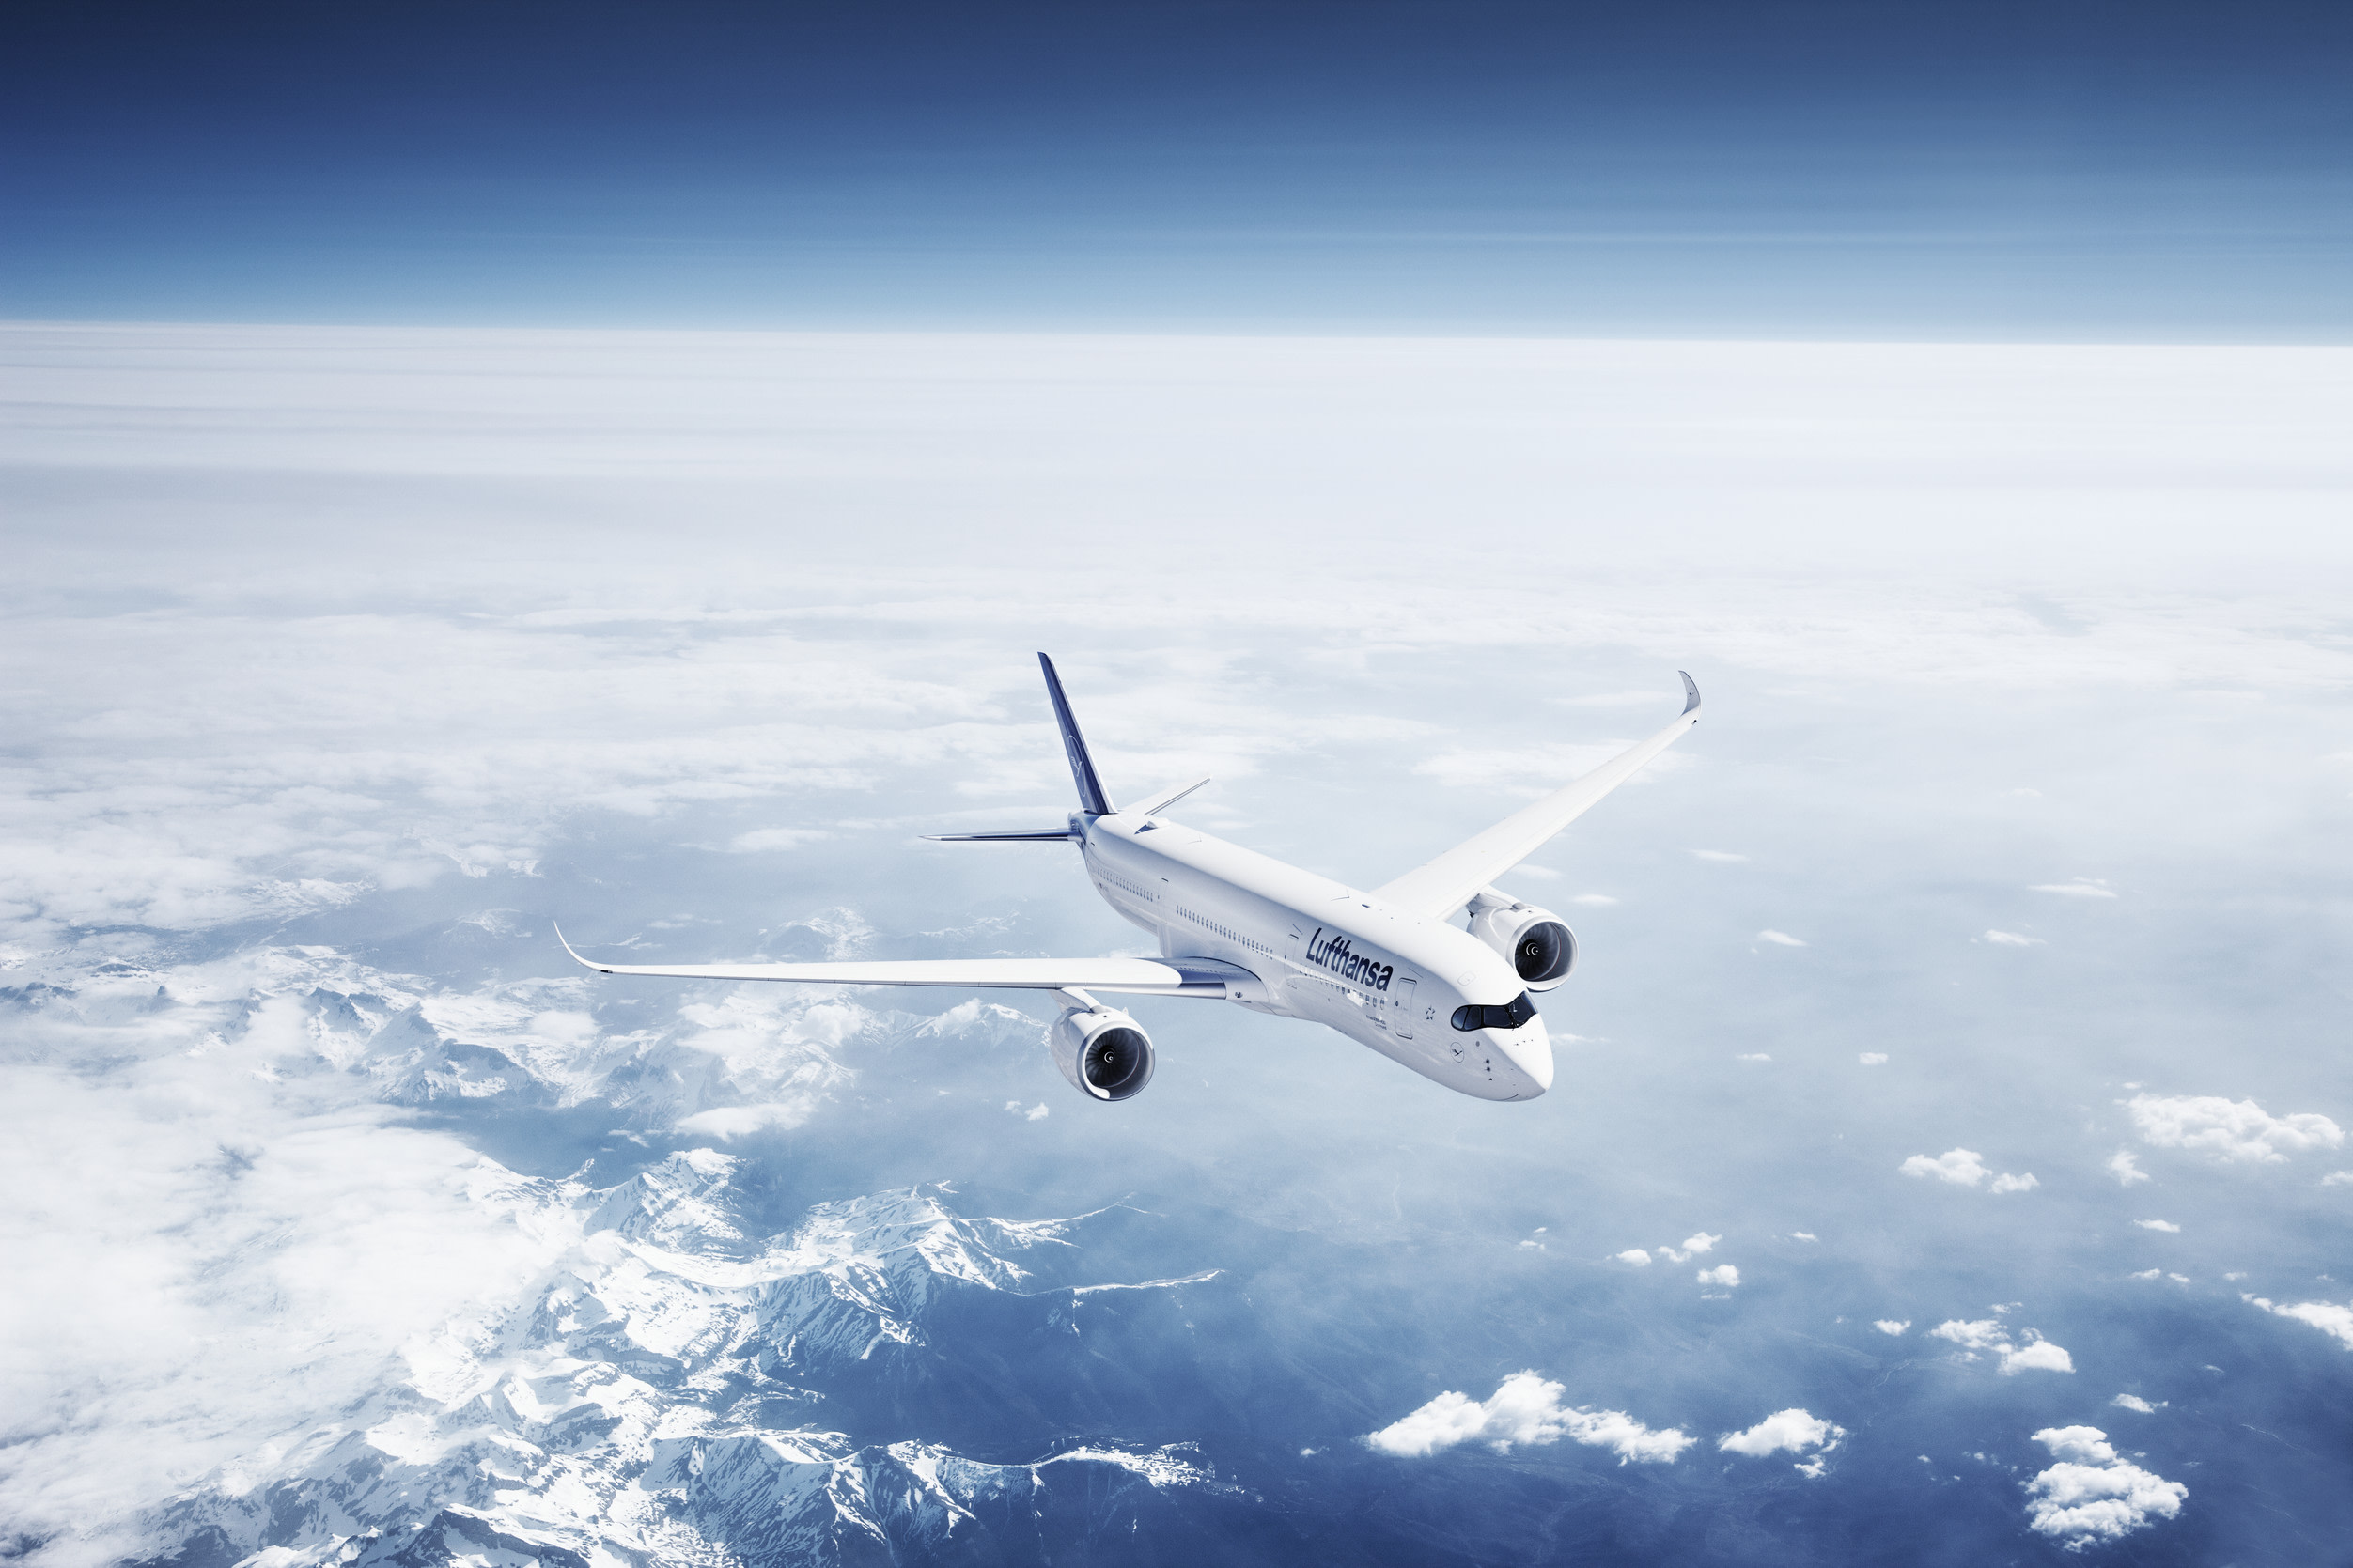 Lufthansa Group is the first worldwide airline to offer a fare for carbon-neutral flights